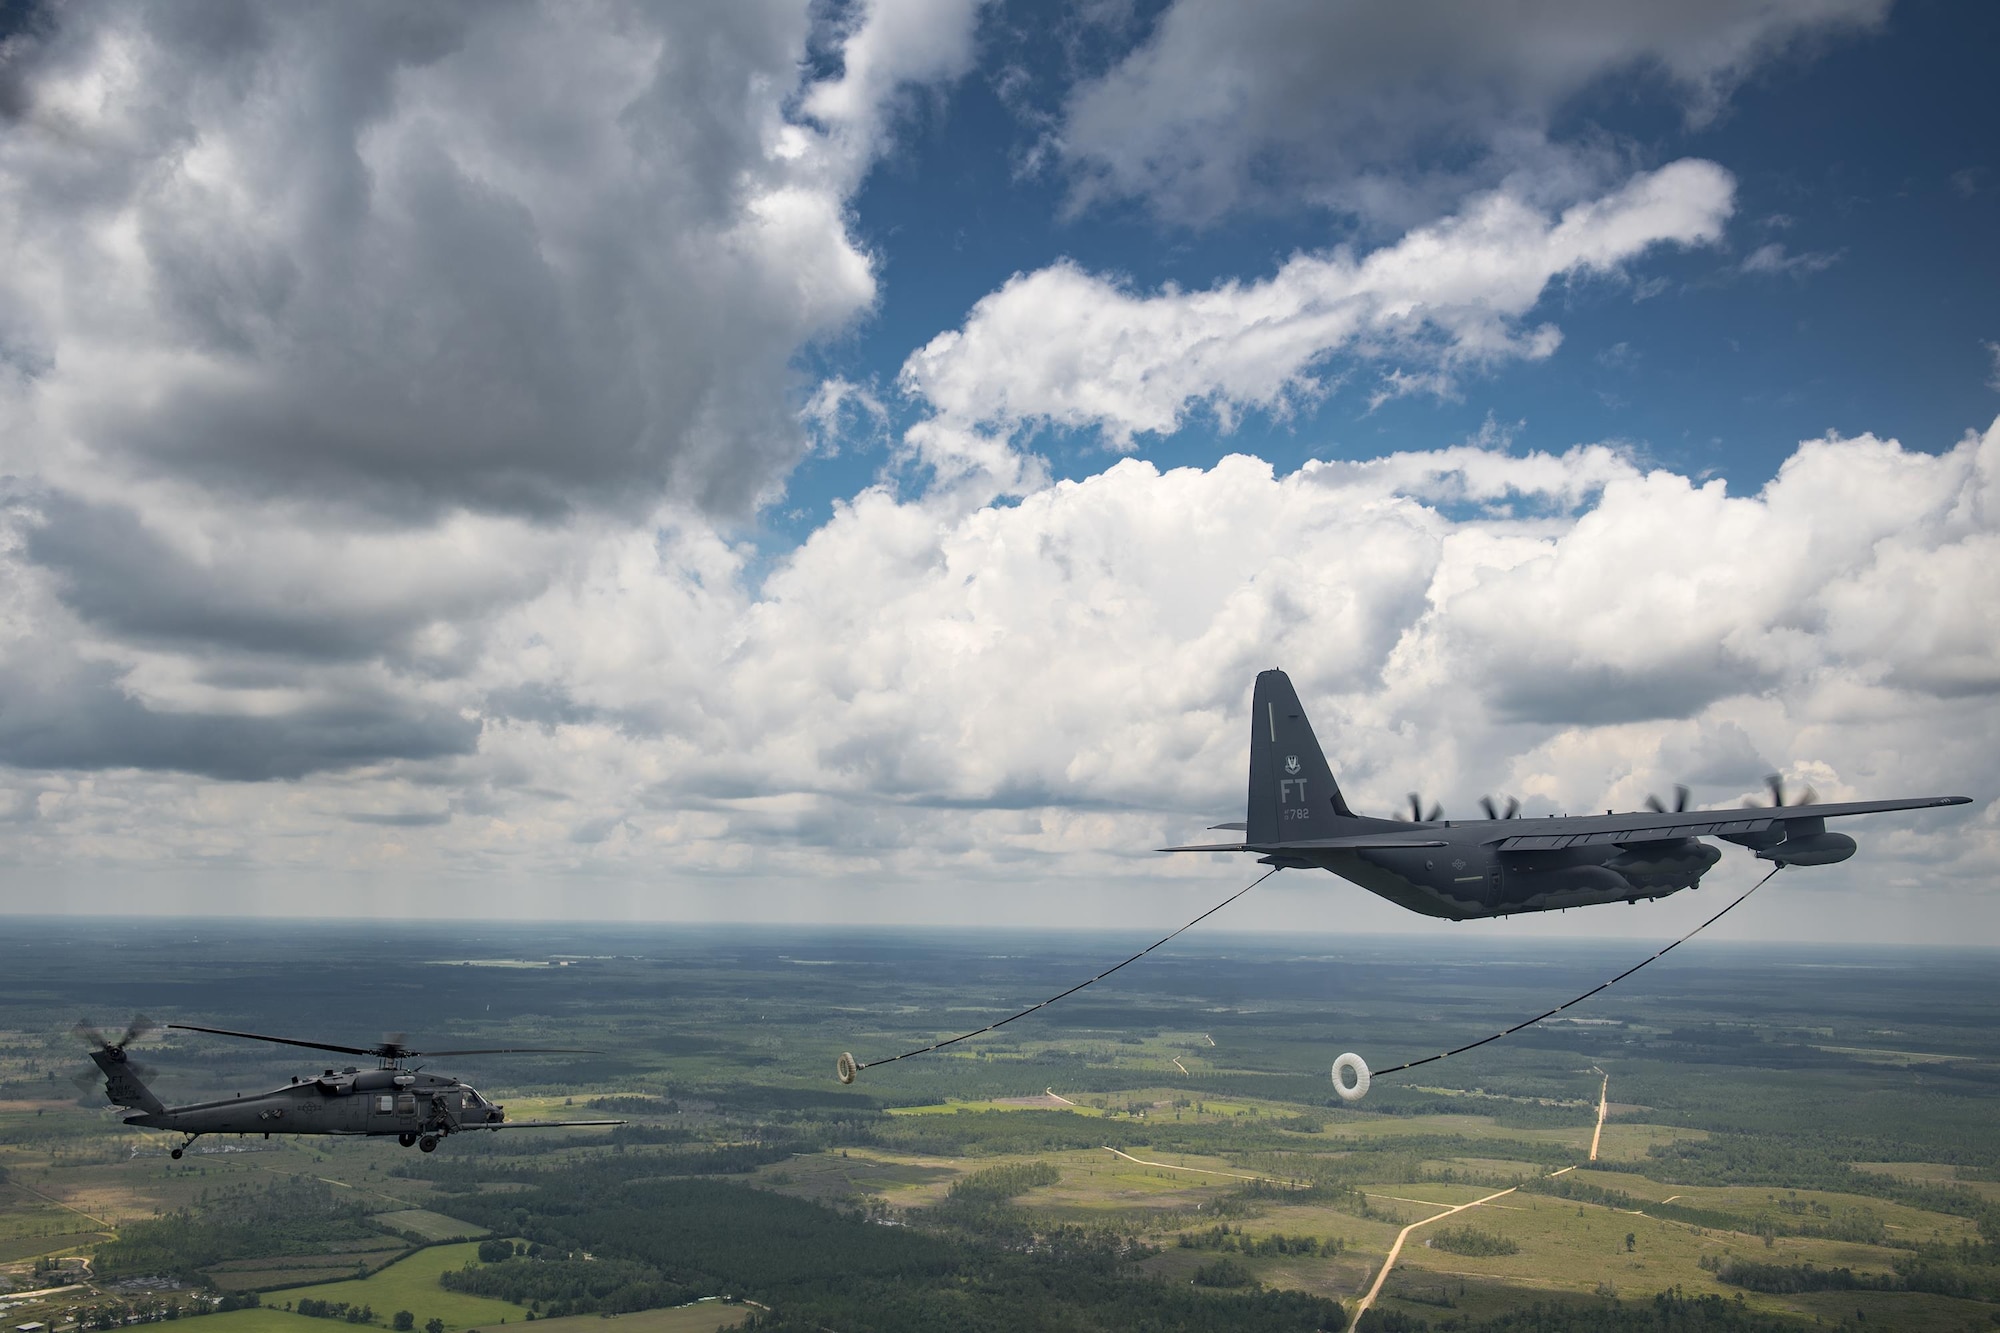 An HH-60G Pave Hawk from the 41st Rescue Squadron approaches an HC-130J Combat King II from the 71st RQS to conduct aerial refueling during 23d Wing commander Col. Thomas Kunkel’s fini-flight, June 27, 2017, at Moody Air Force Base, Ga. The fini-flight is a long-standing Air Force tradition that occurs when a pilot departs from the base. Upon completion of their final flights, military aviators are hosed down with water or champagne by their family and friends before they depart their unit. (U.S. Air Force photo by Staff Sgt. Ryan Callaghan)